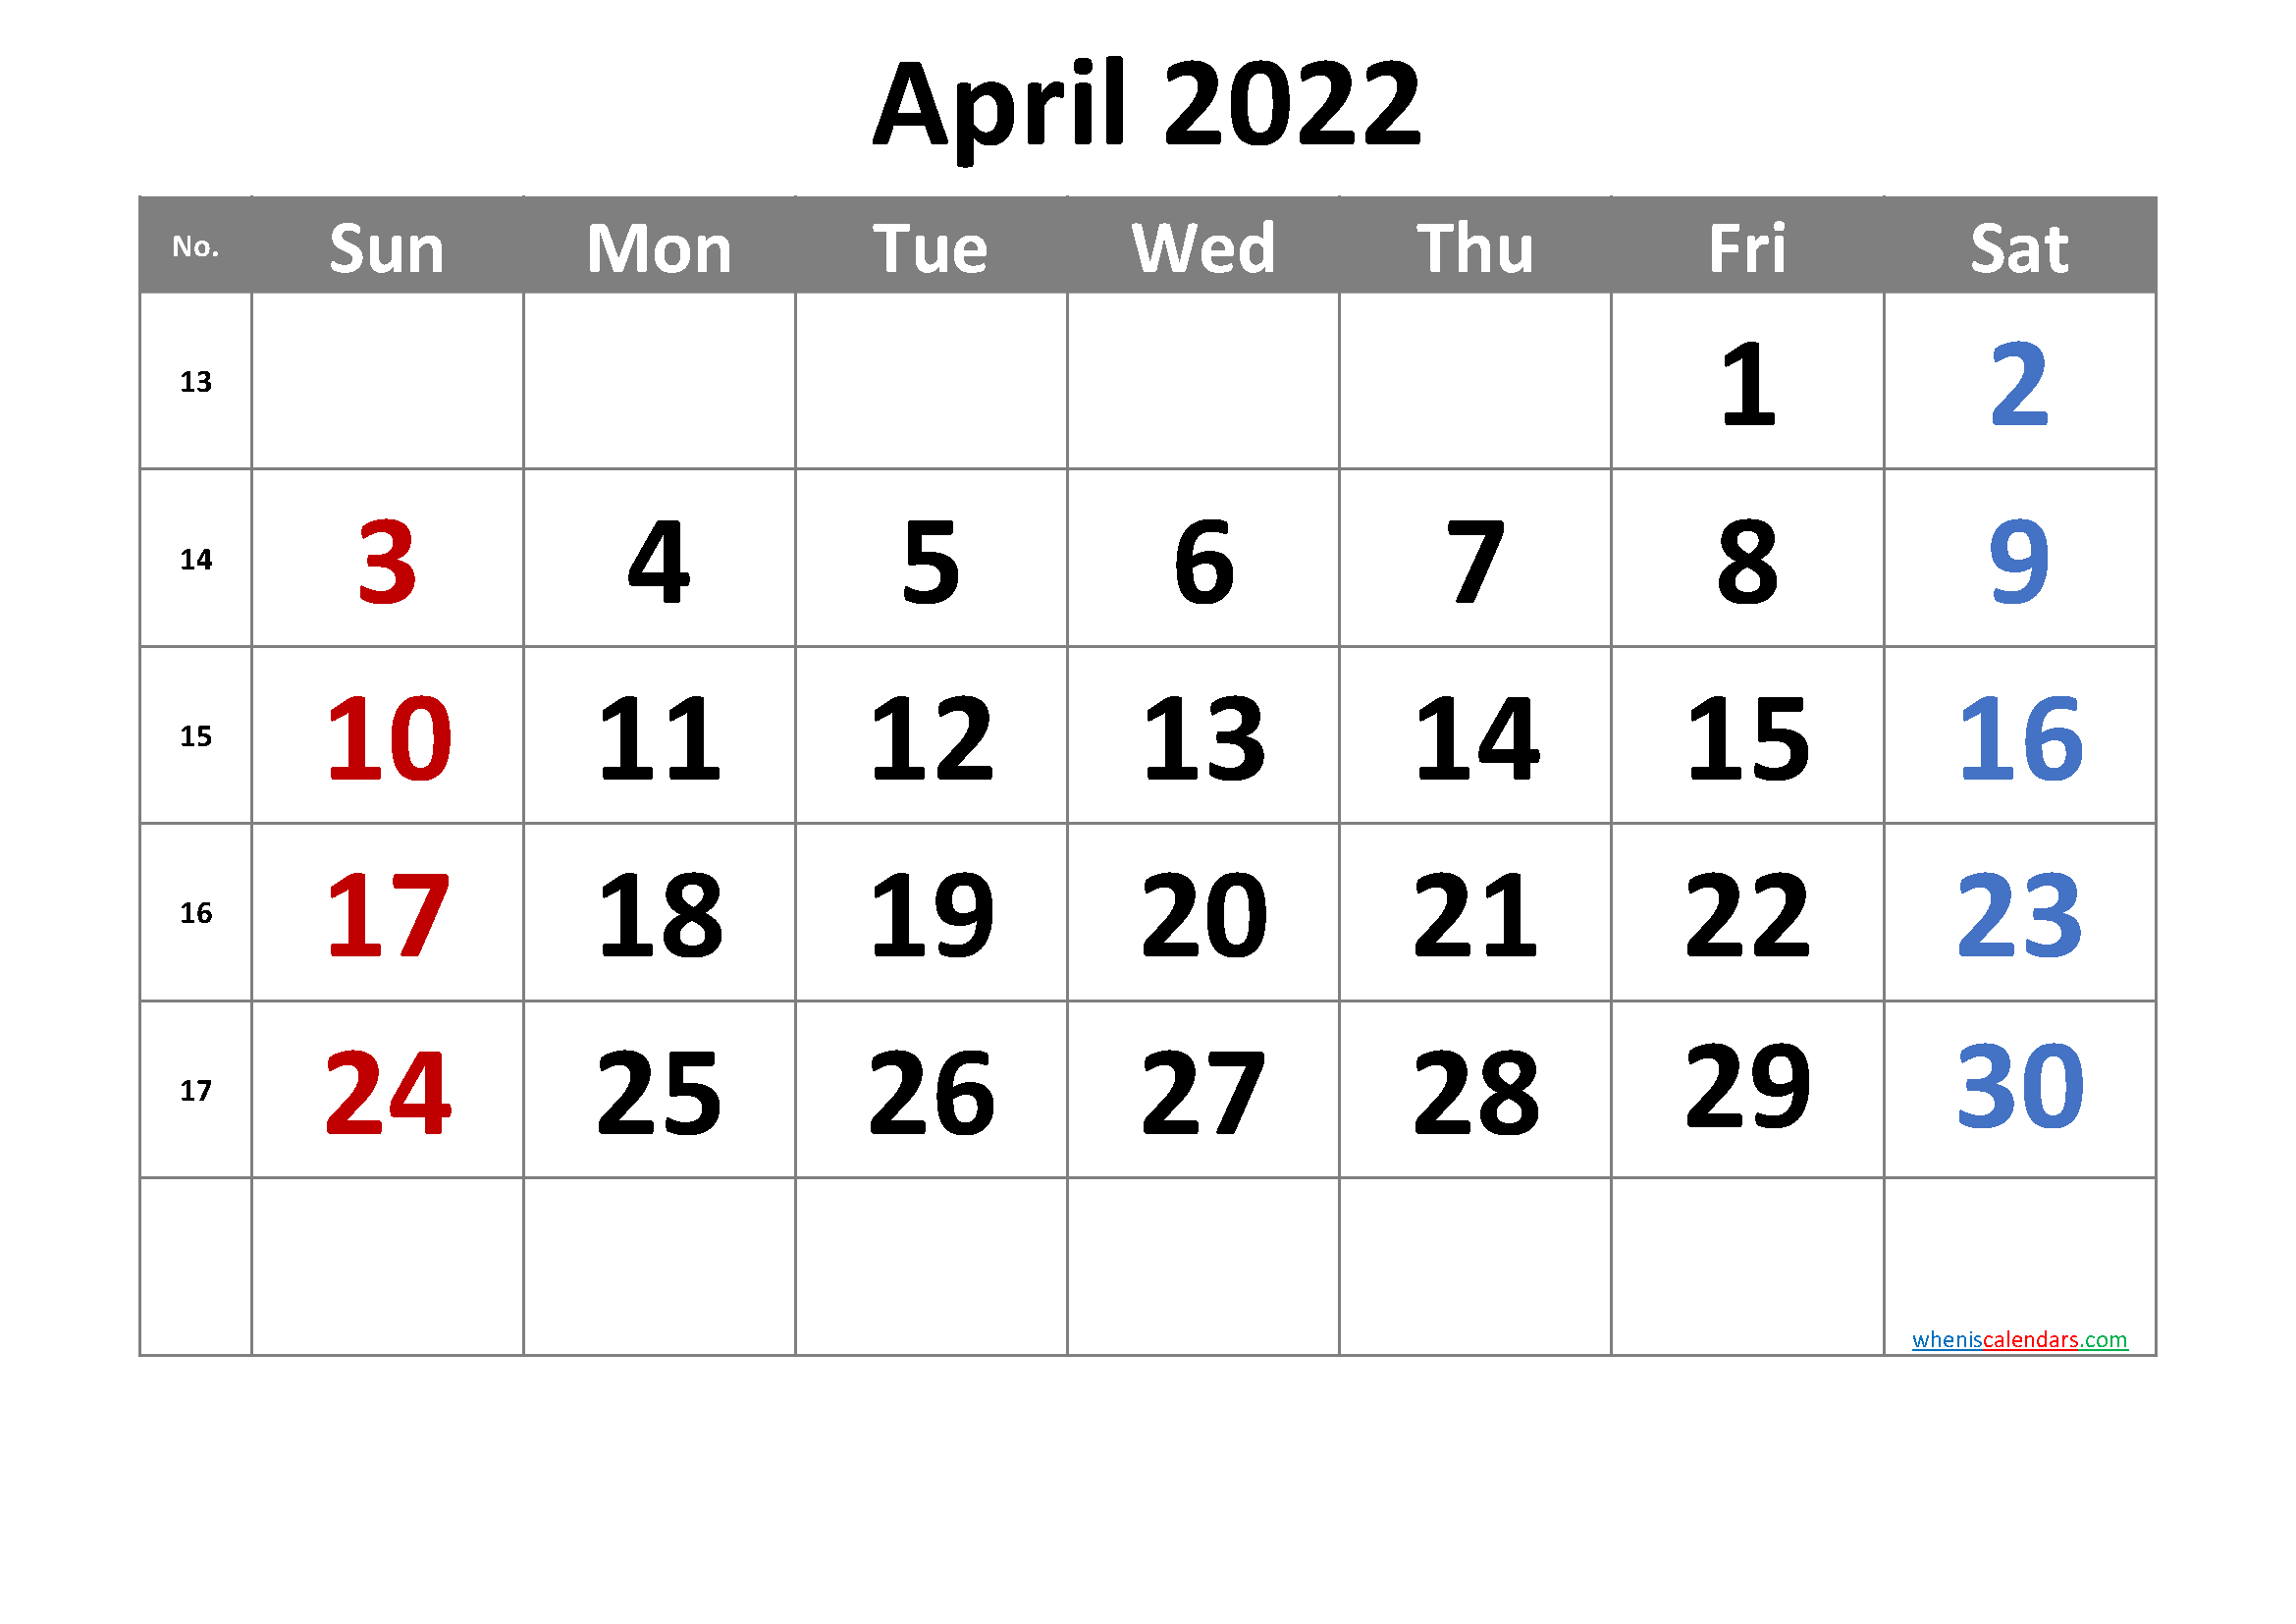 Plan Ahead with Our April 2022 Calendar Printable Cute – Get Organized Now!